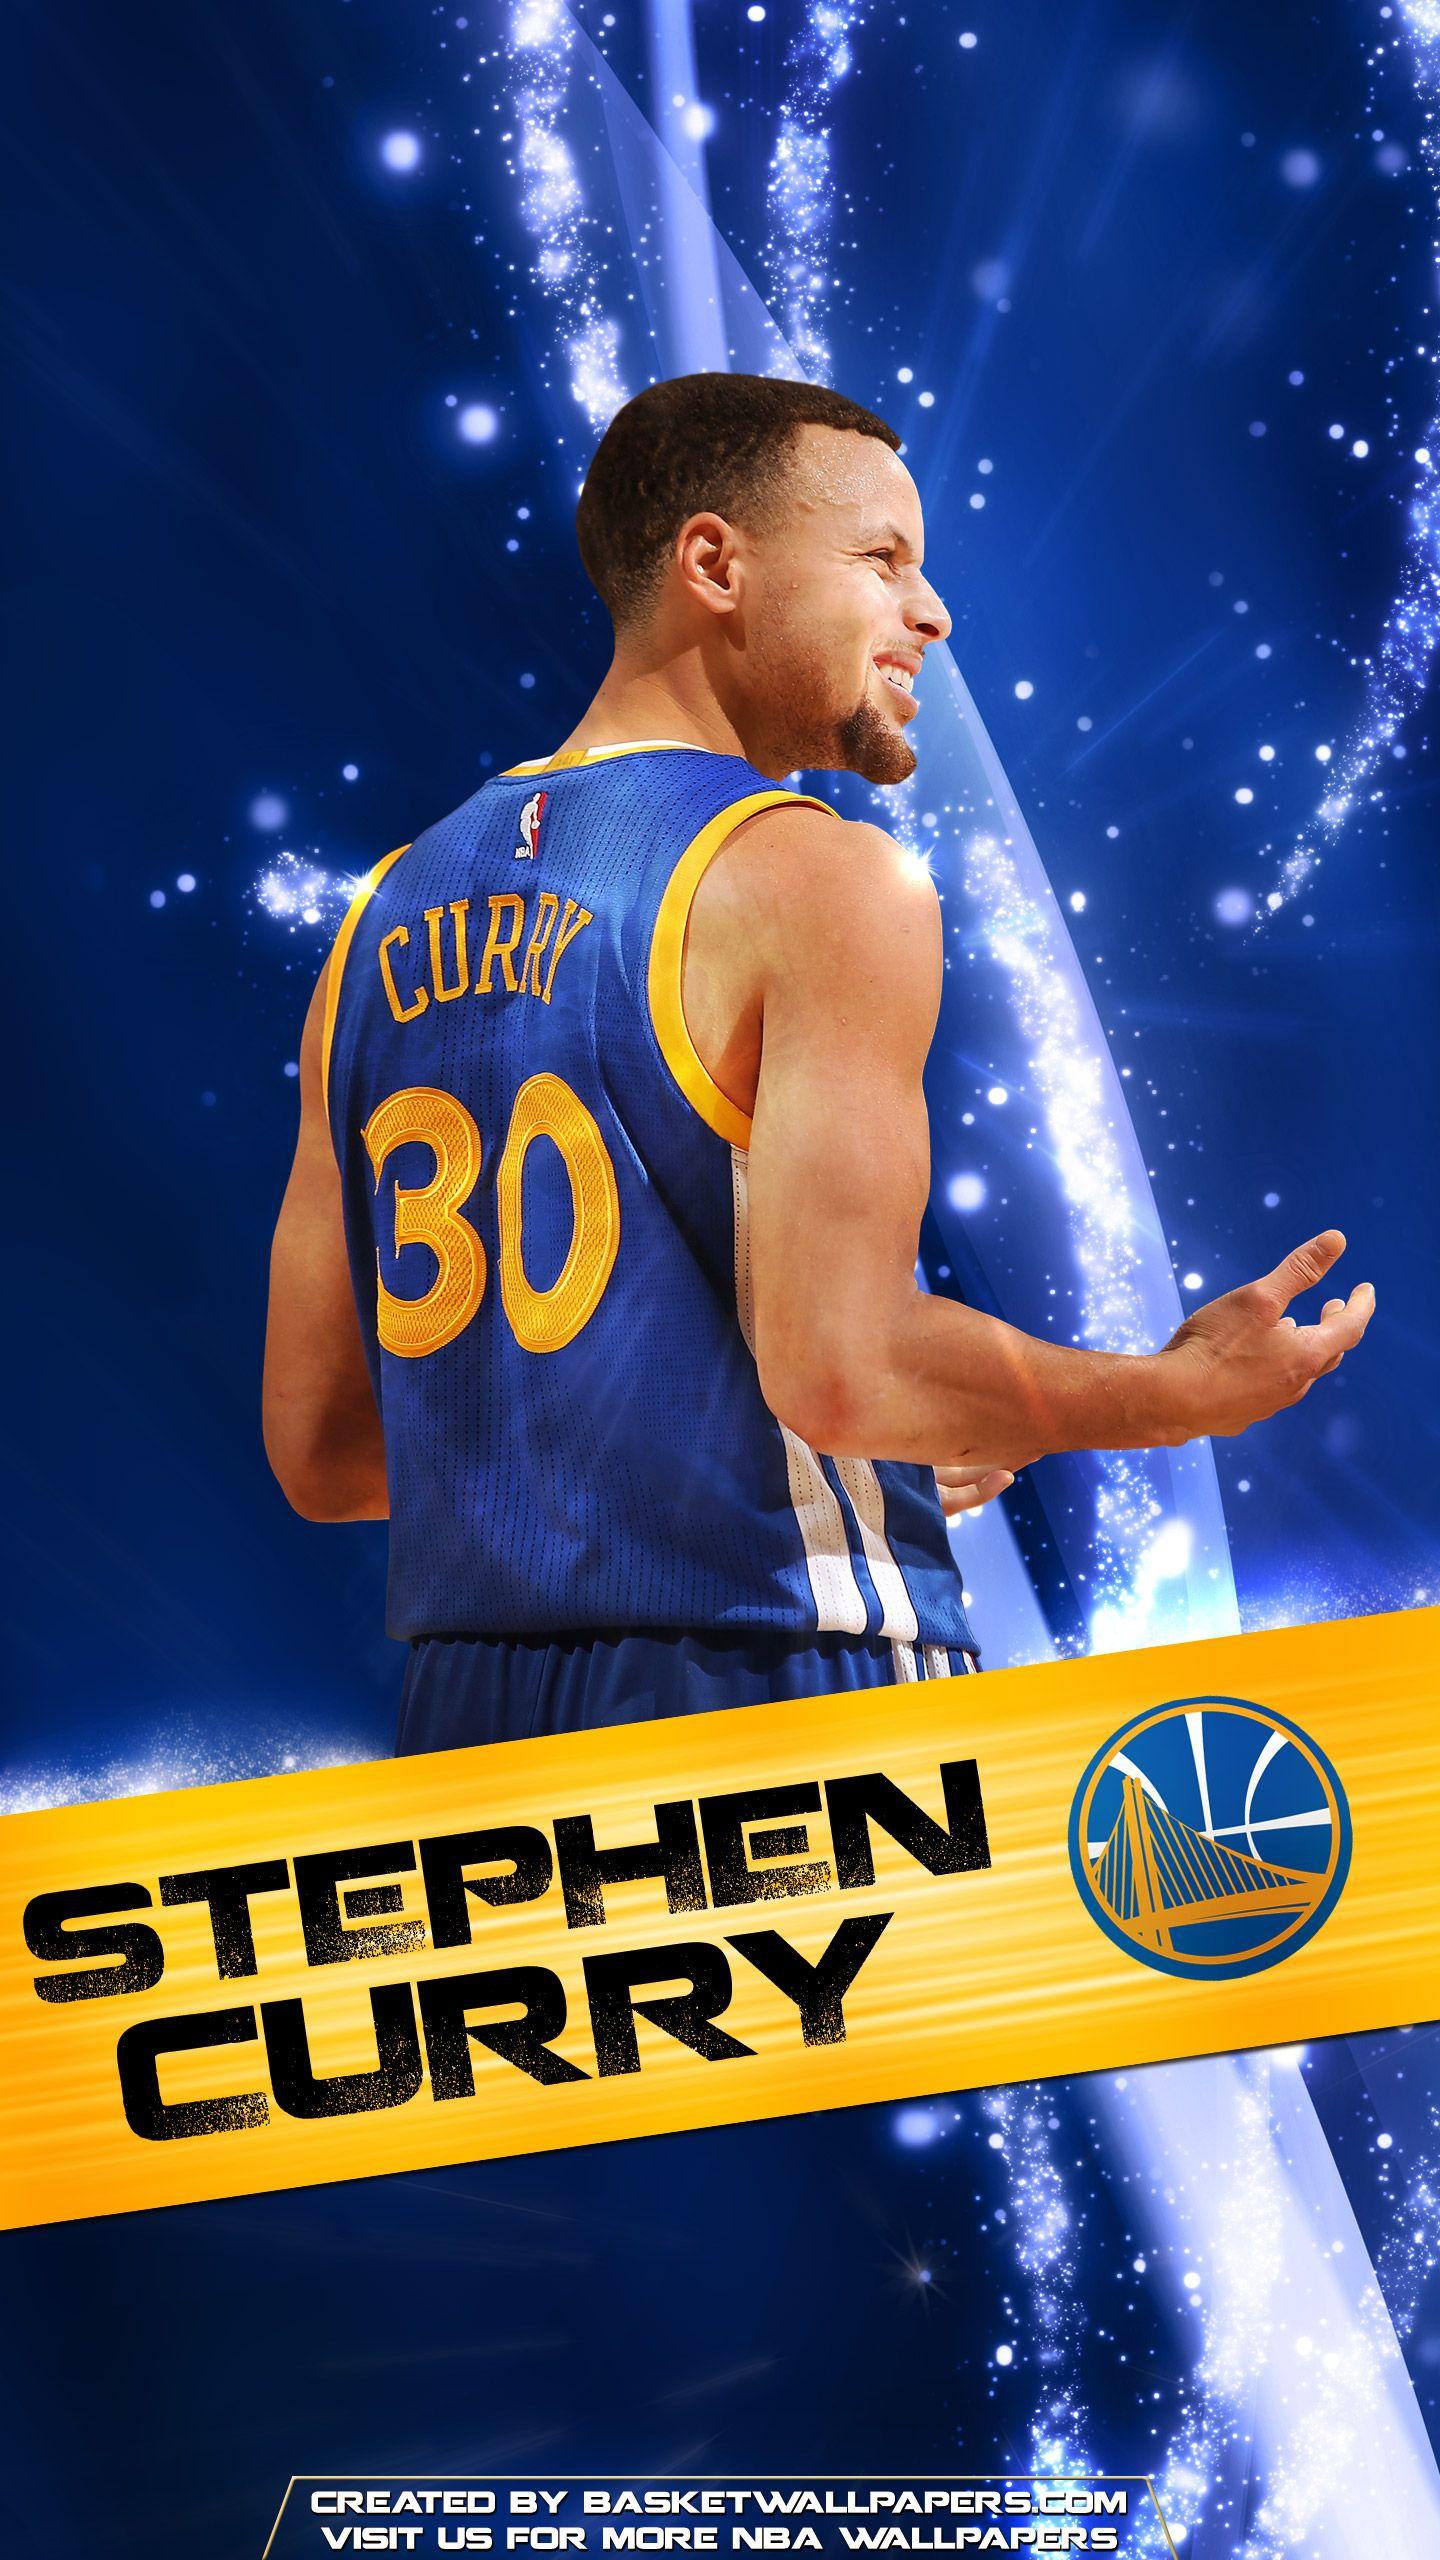 Stephen Curry Wallpaper for iPhone Wallpaper HD. Stephen curry wallpaper, Curry wallpaper, Stephen curry wallpaper hd